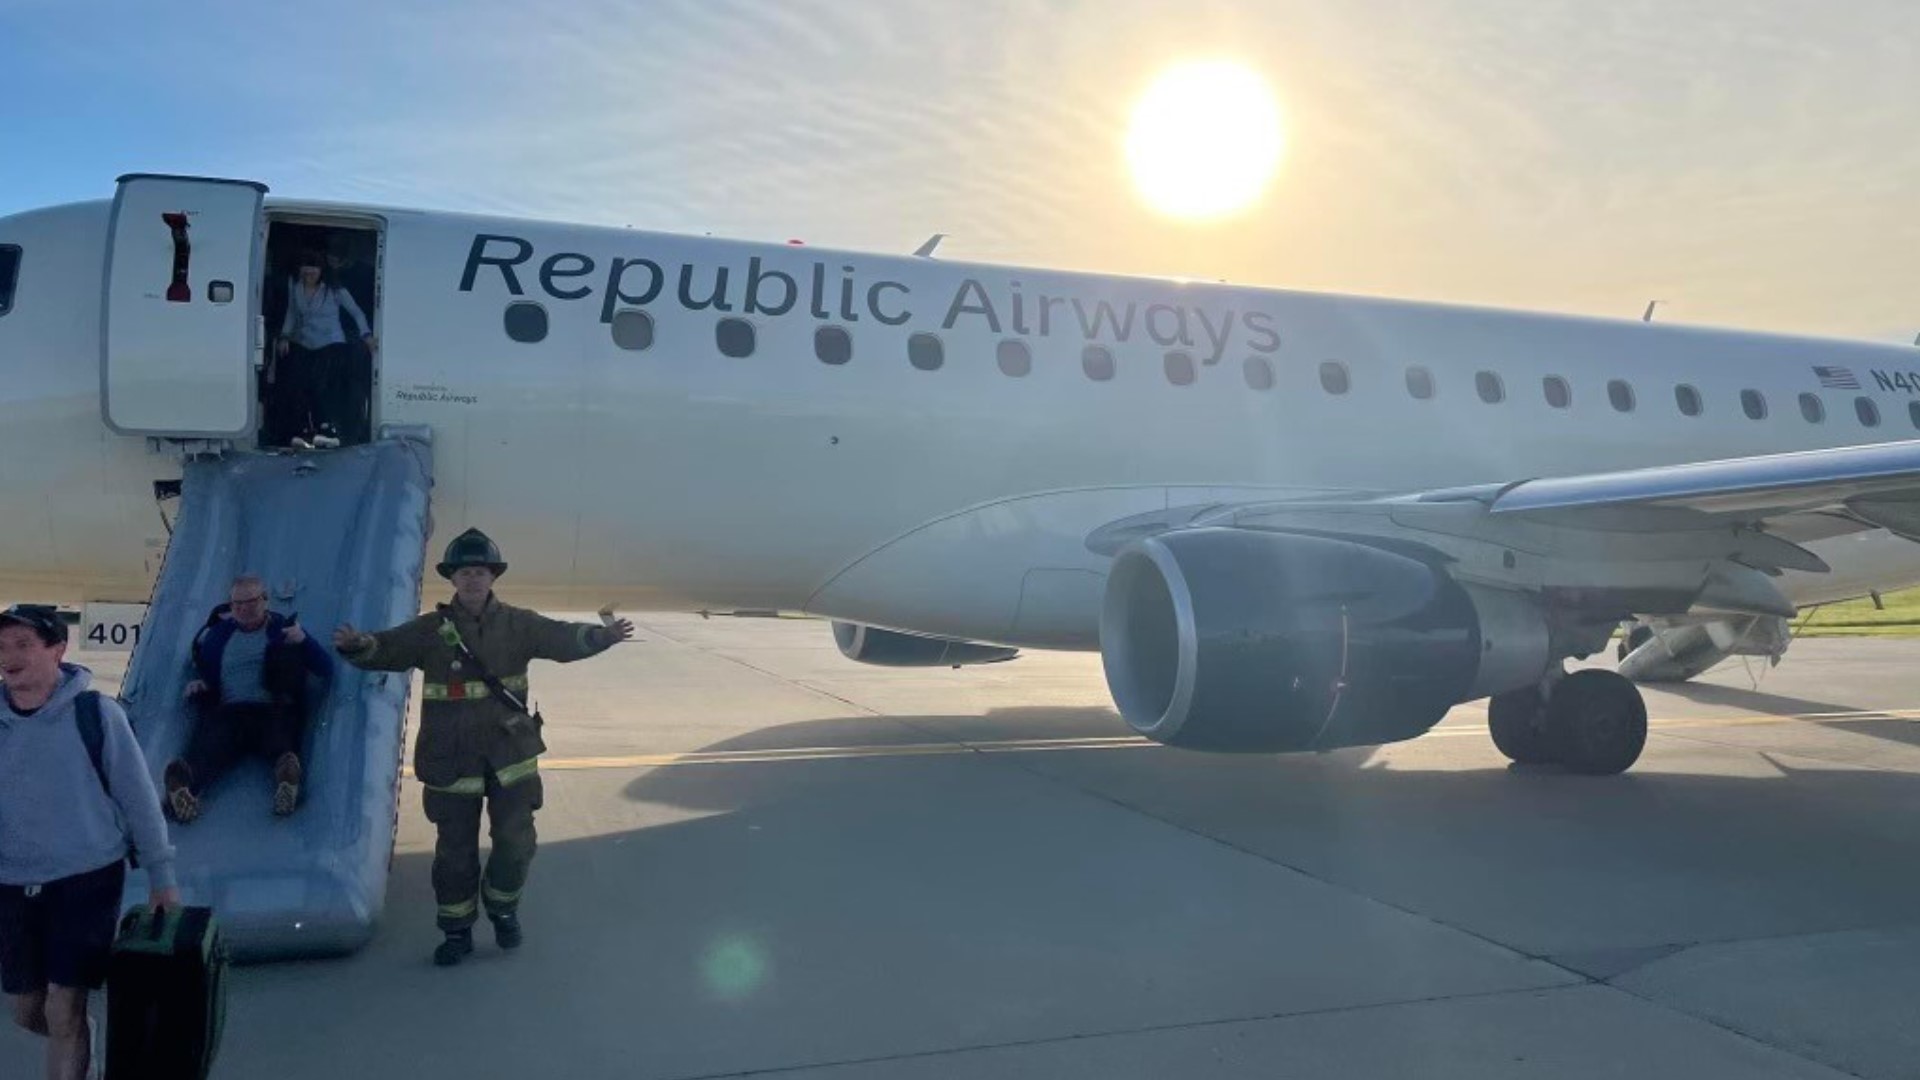 The Republic Airways jet stopped its takeoff after an odor was reported in the cabin.